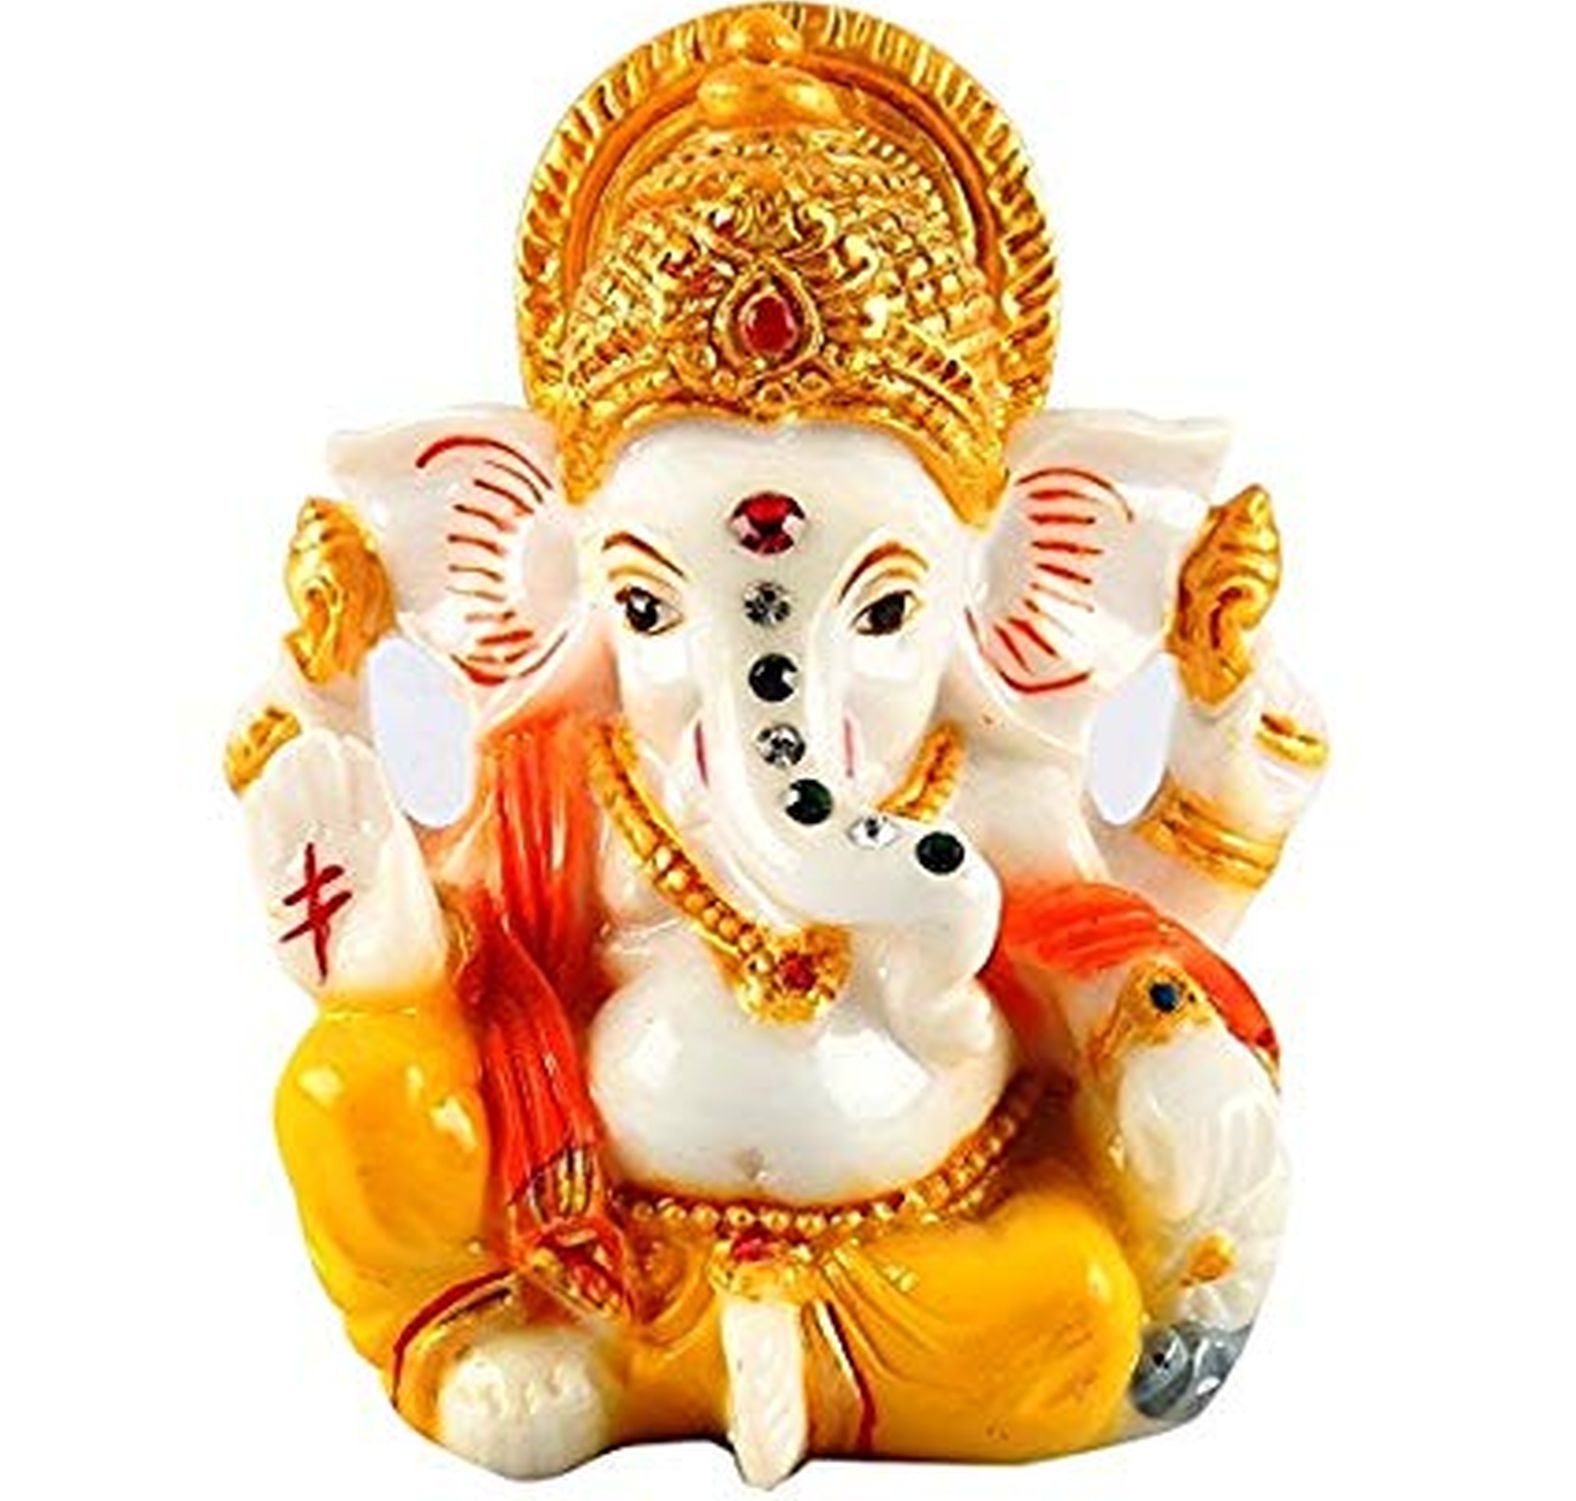 Ganeshotsav started in 1920 for the first time in Tilak Hall